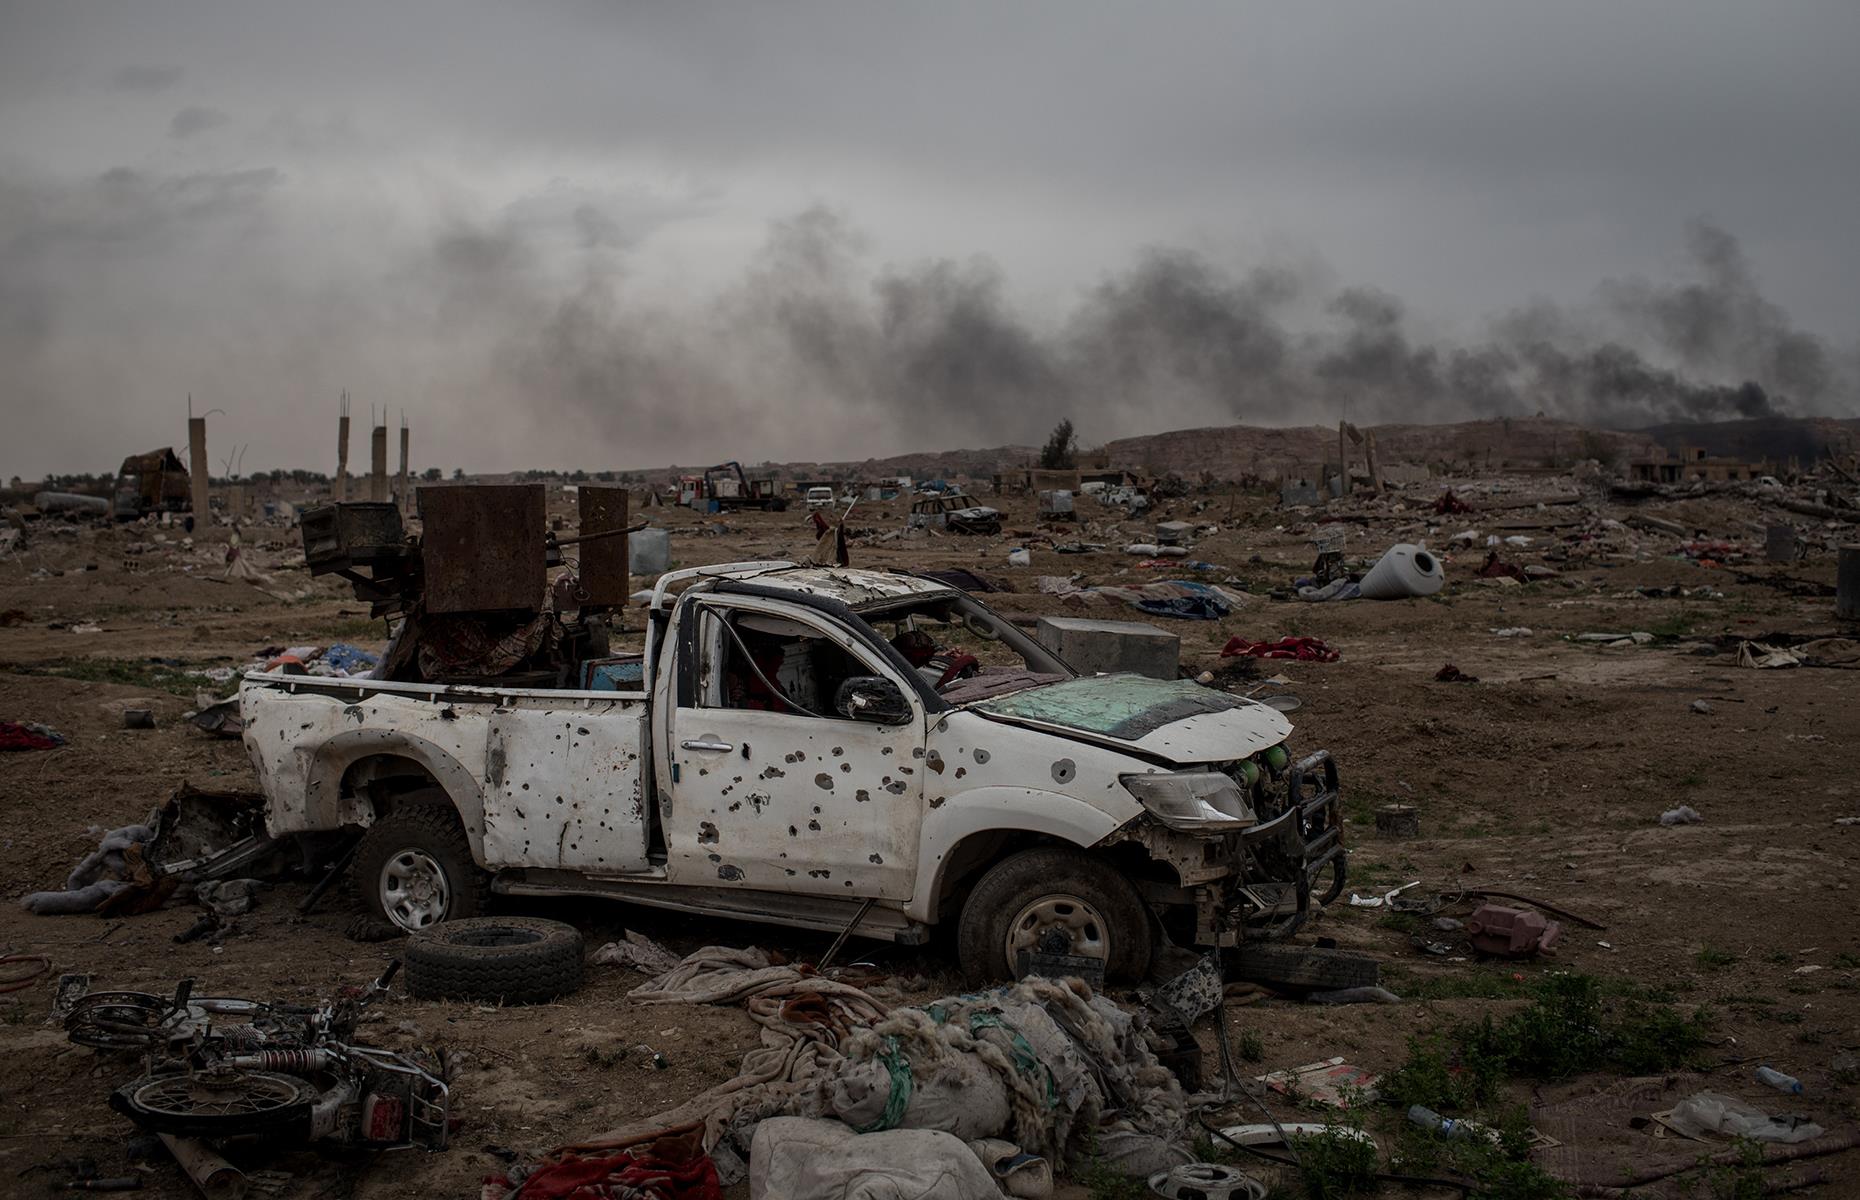 <p>Despite moving up the Global Peace Index in recent years, Iraq is still the seventh most dangerous country in the world. The improvement is mostly down to the decline of Islamic State group (or ISIS) influence in the country, alongside a general increase in political stability.</p>